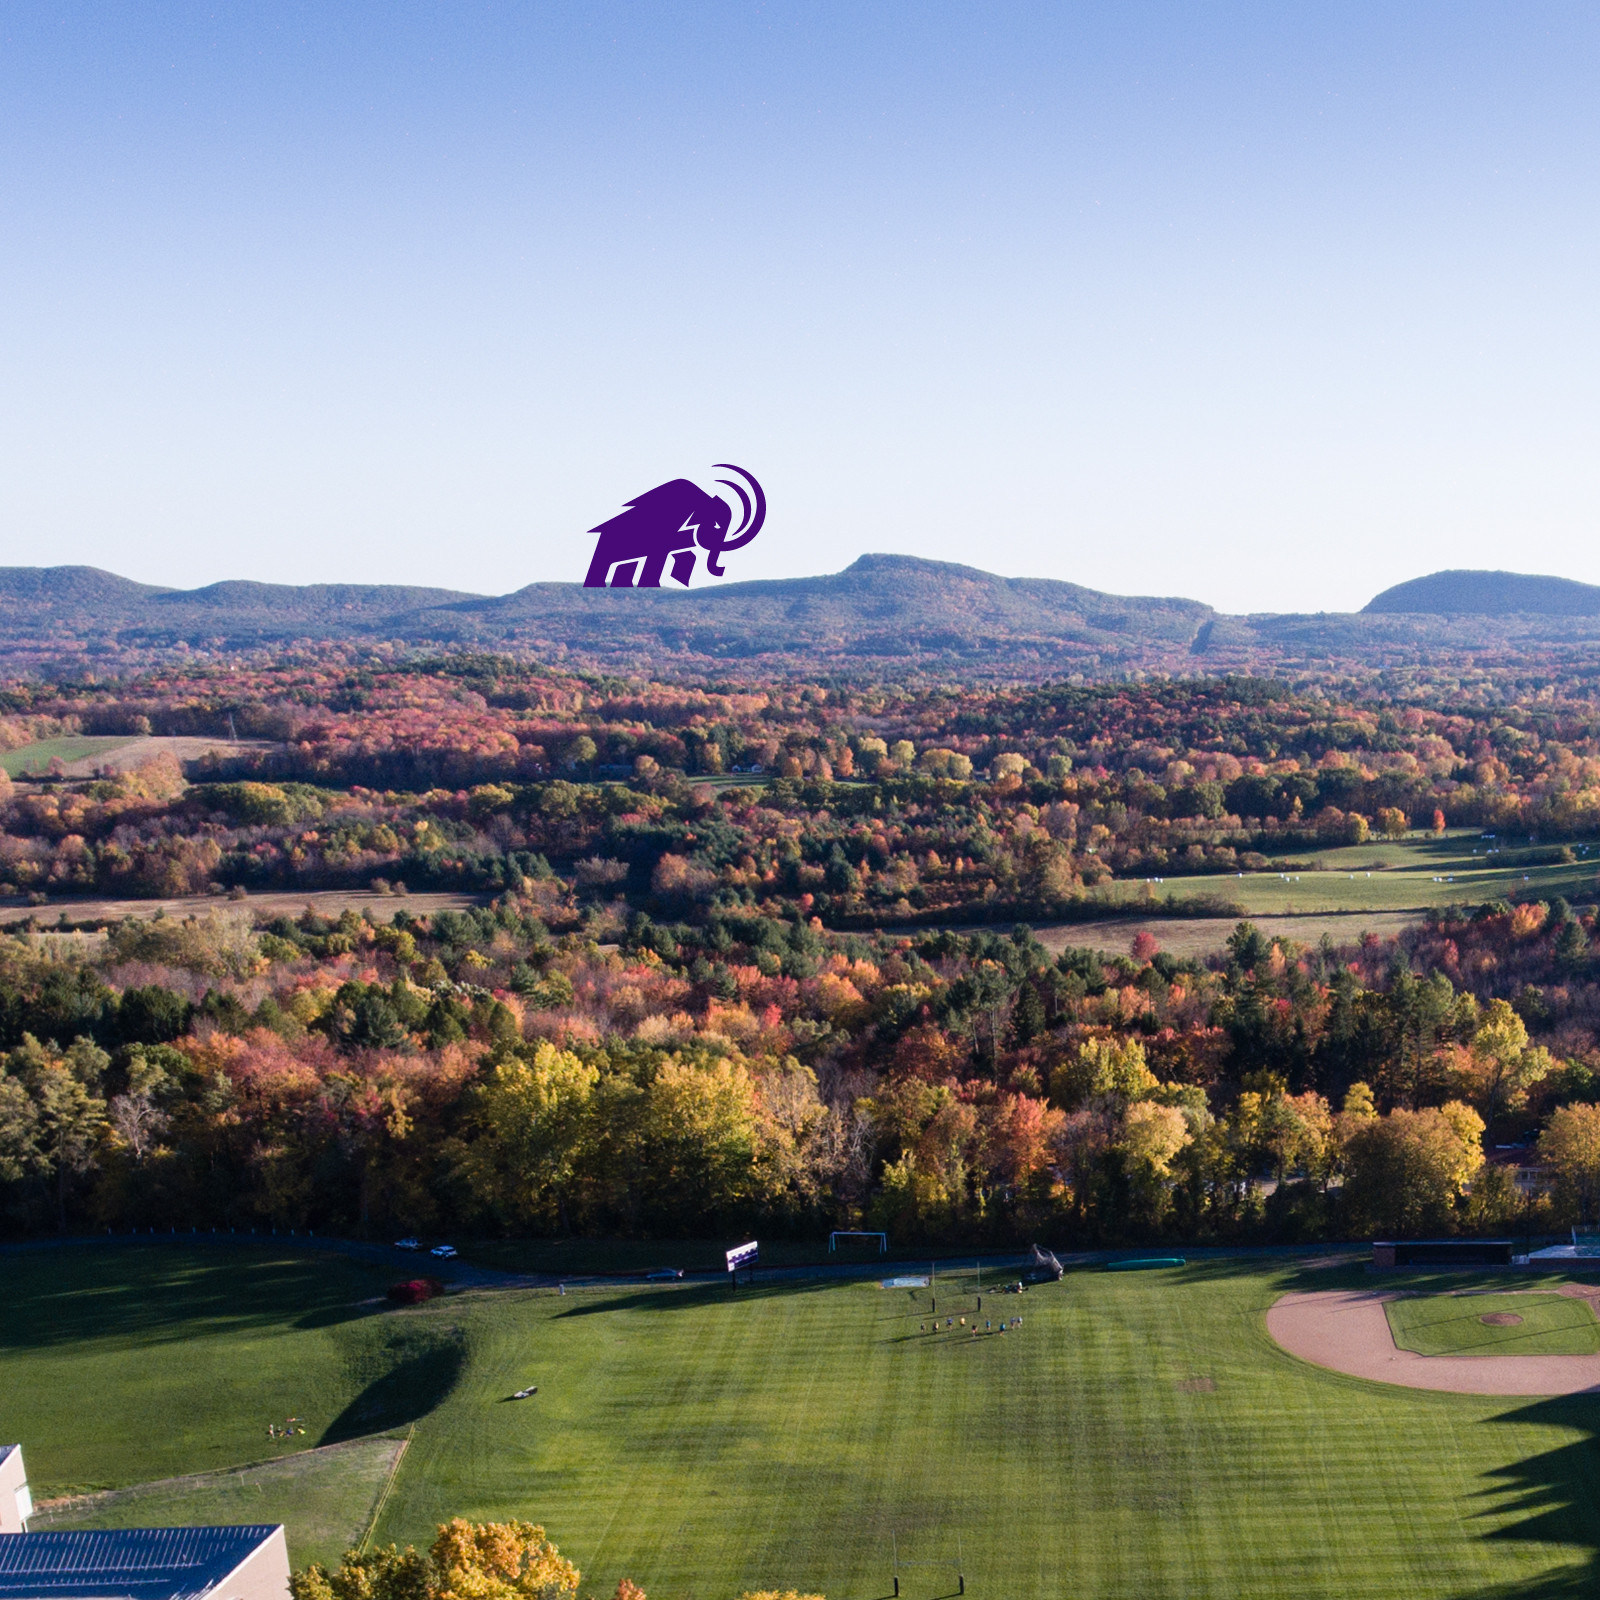 Mammoth walking across the range in an aerial photo of campus